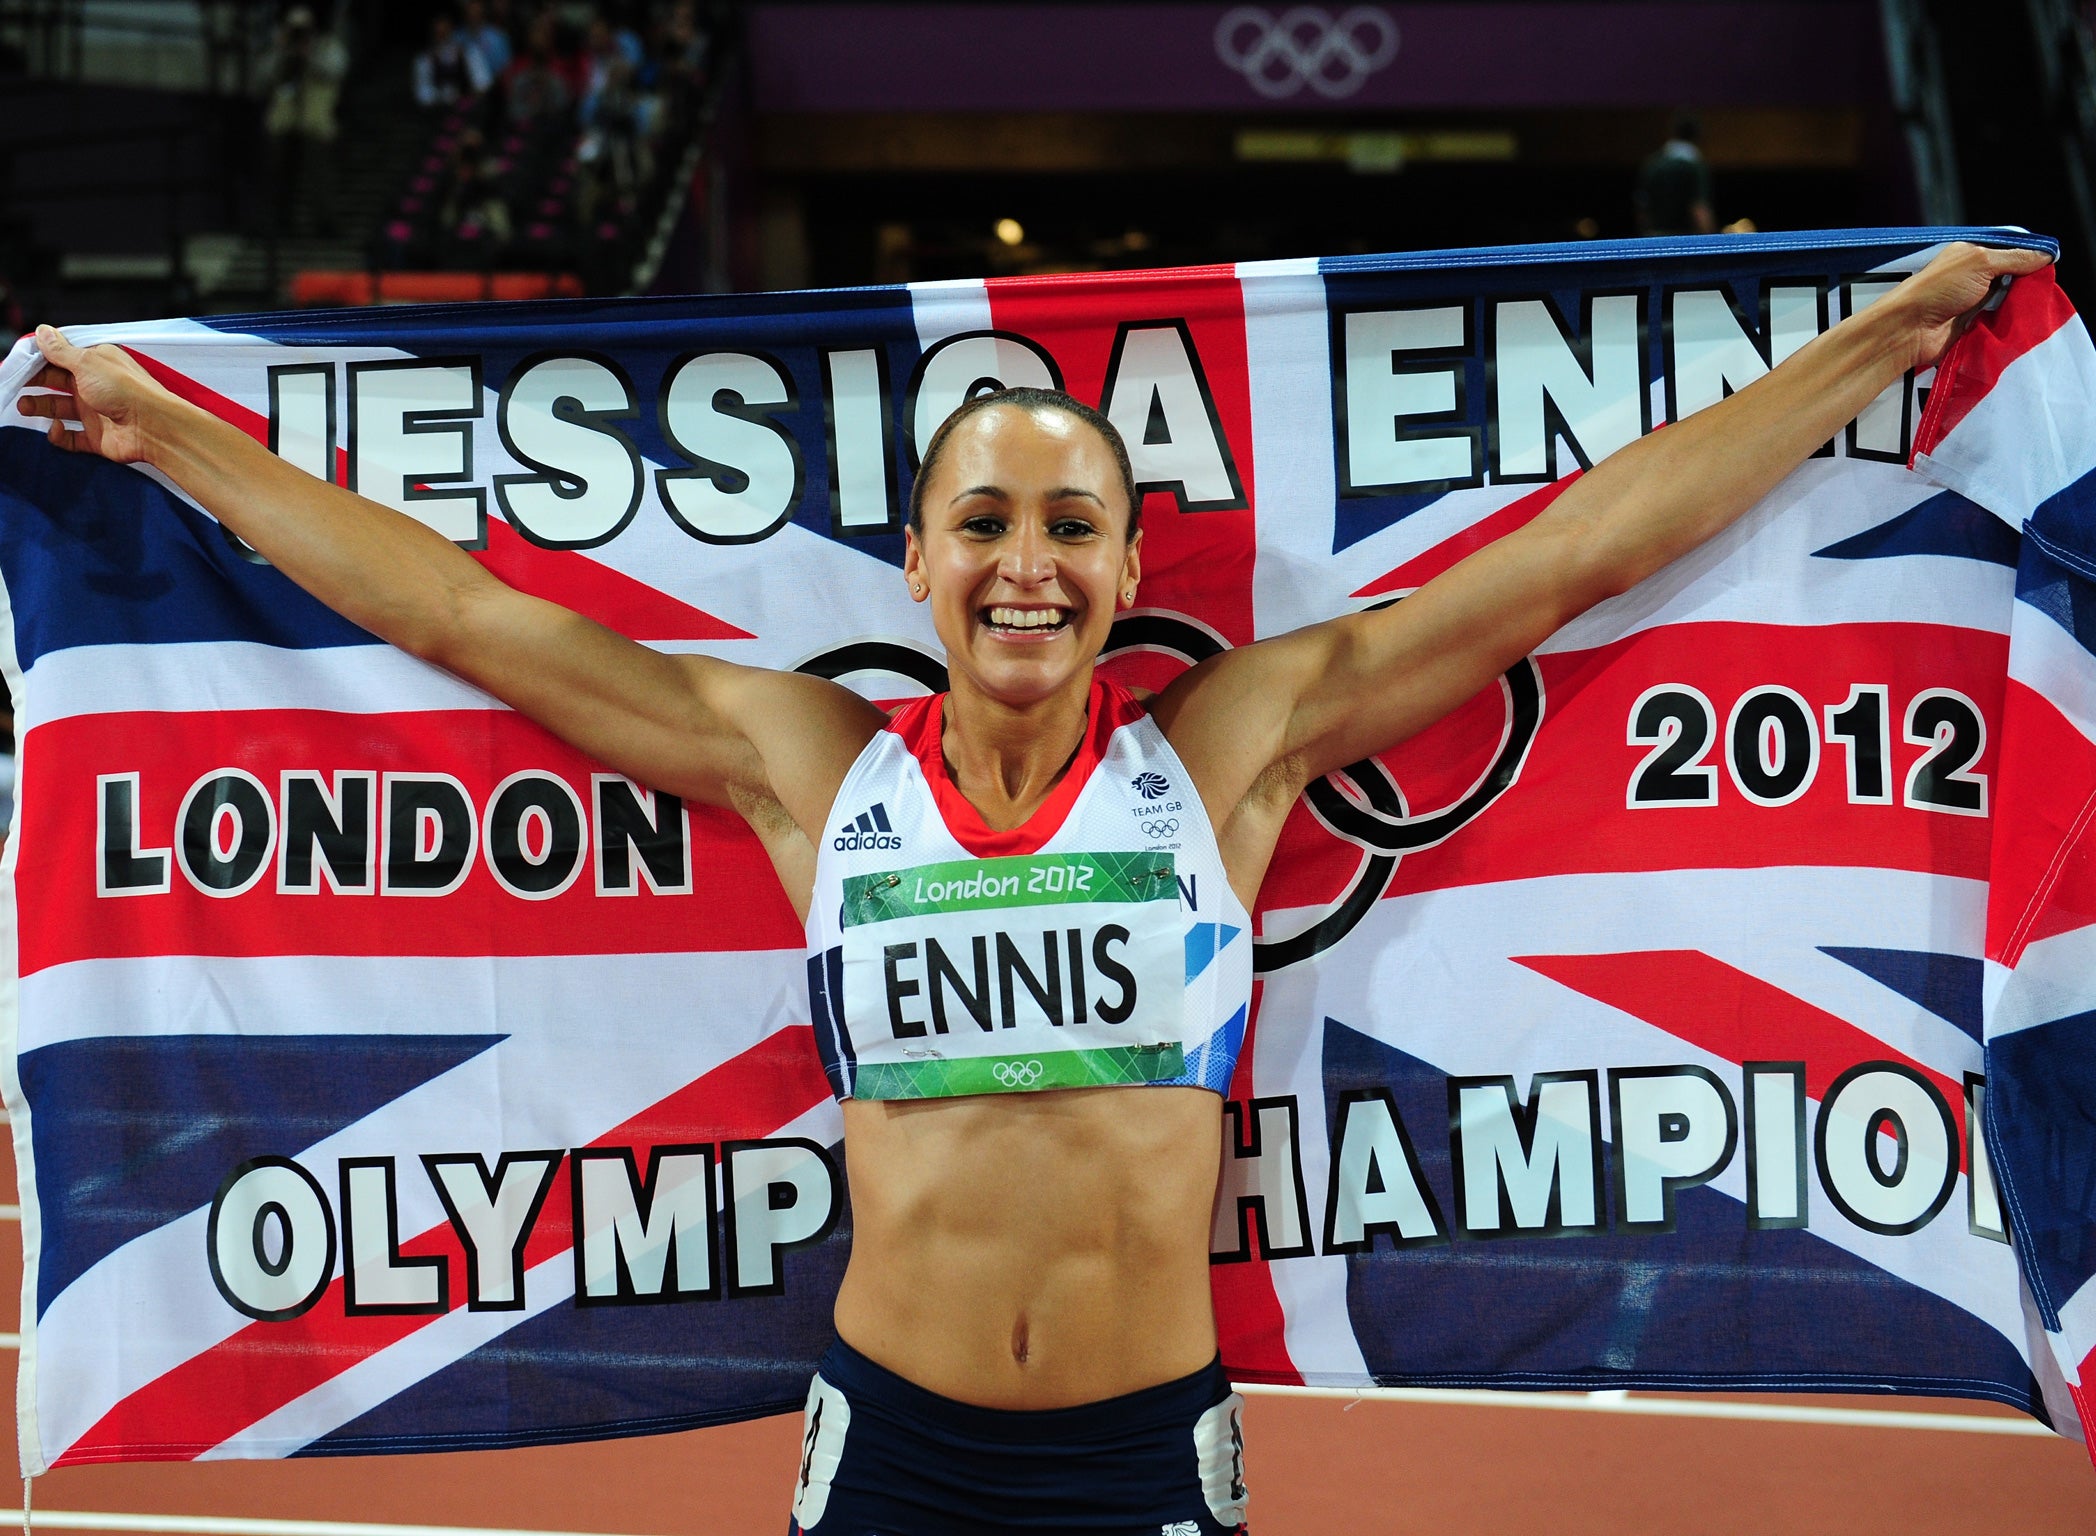 Jessica Ennis's gold medal was one of the highlights of the London Olympics